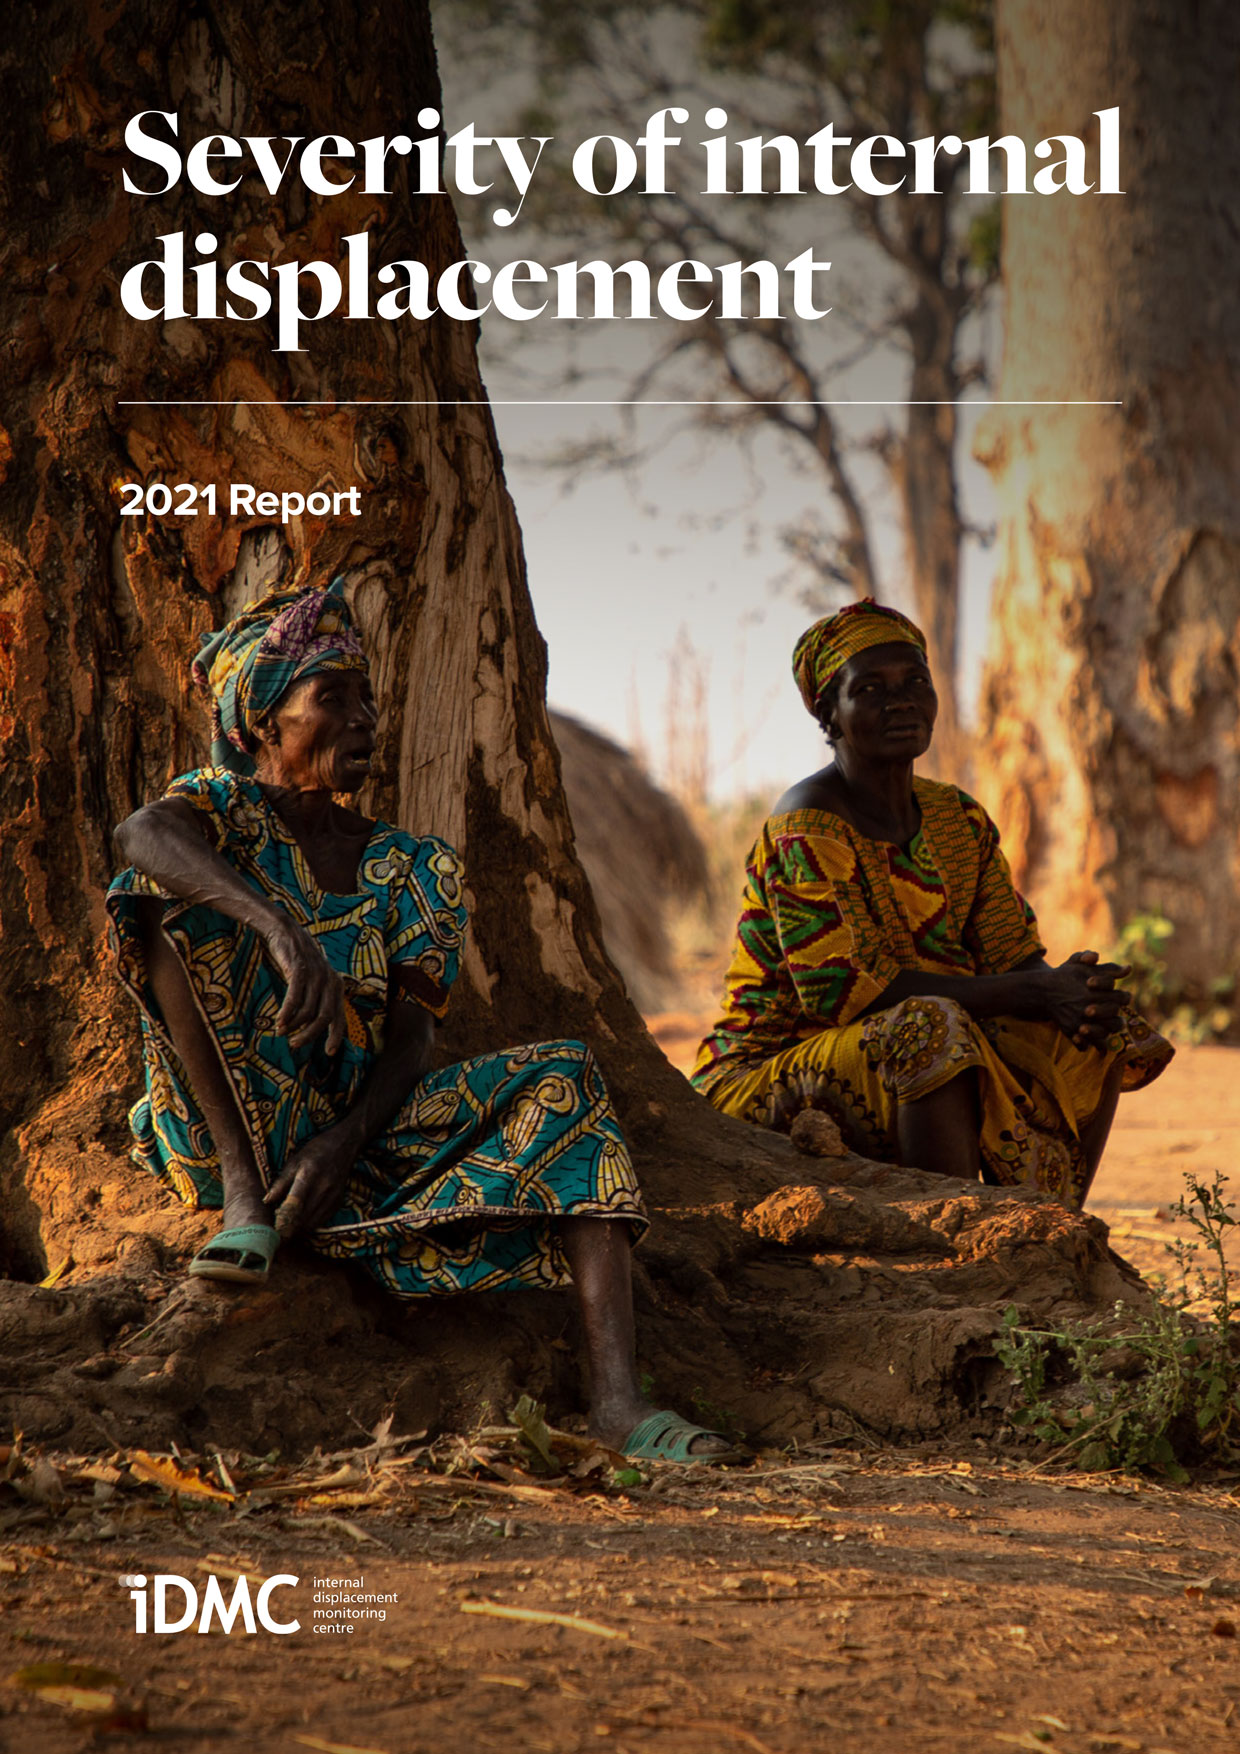 Severity of internal displacement, 2021 Report